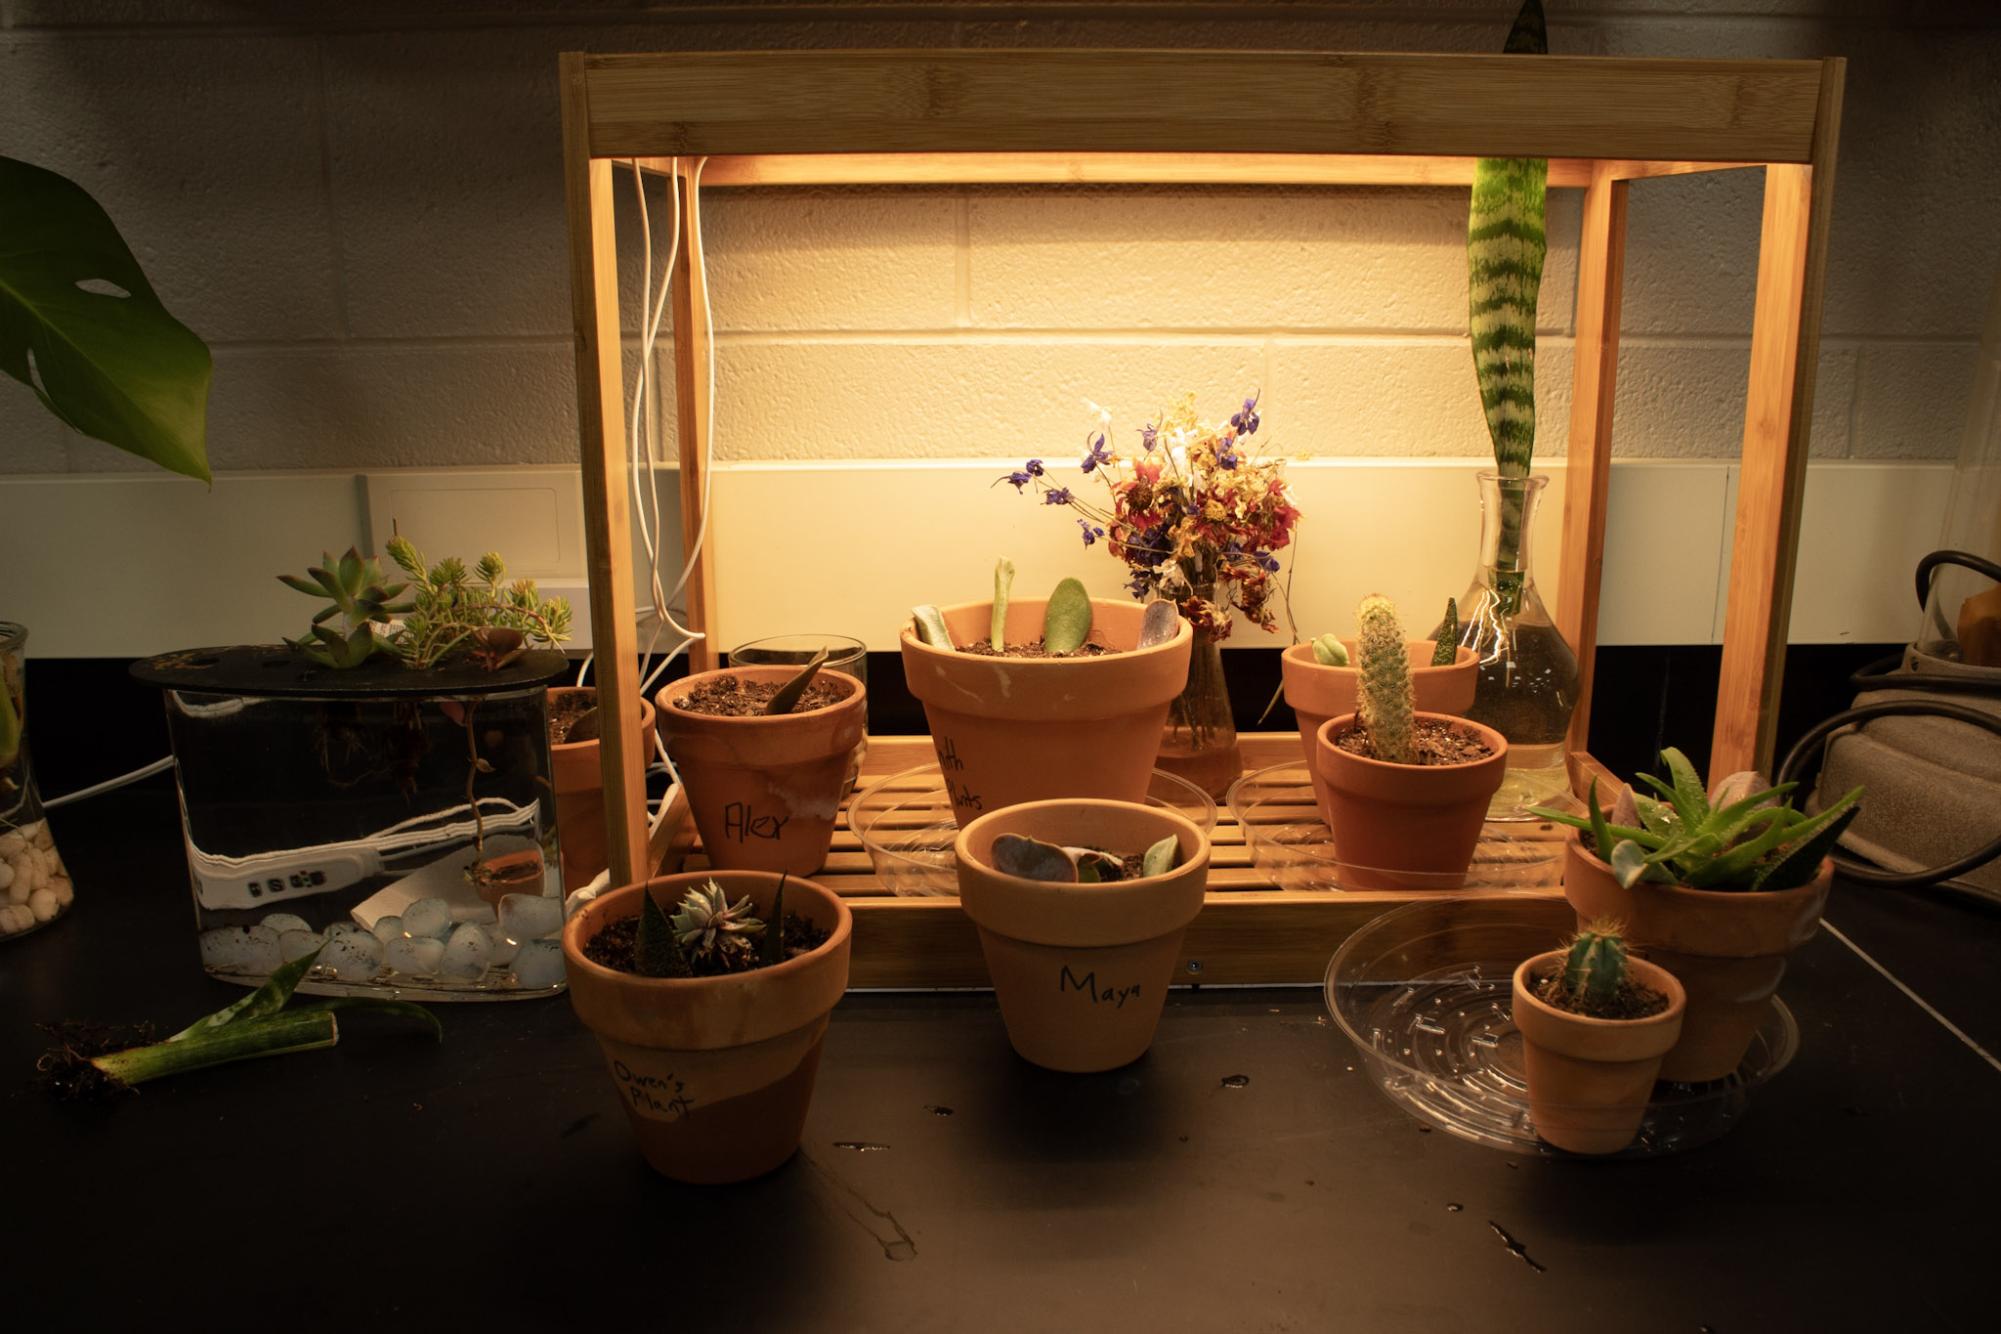 Propagated plants from Plant Science